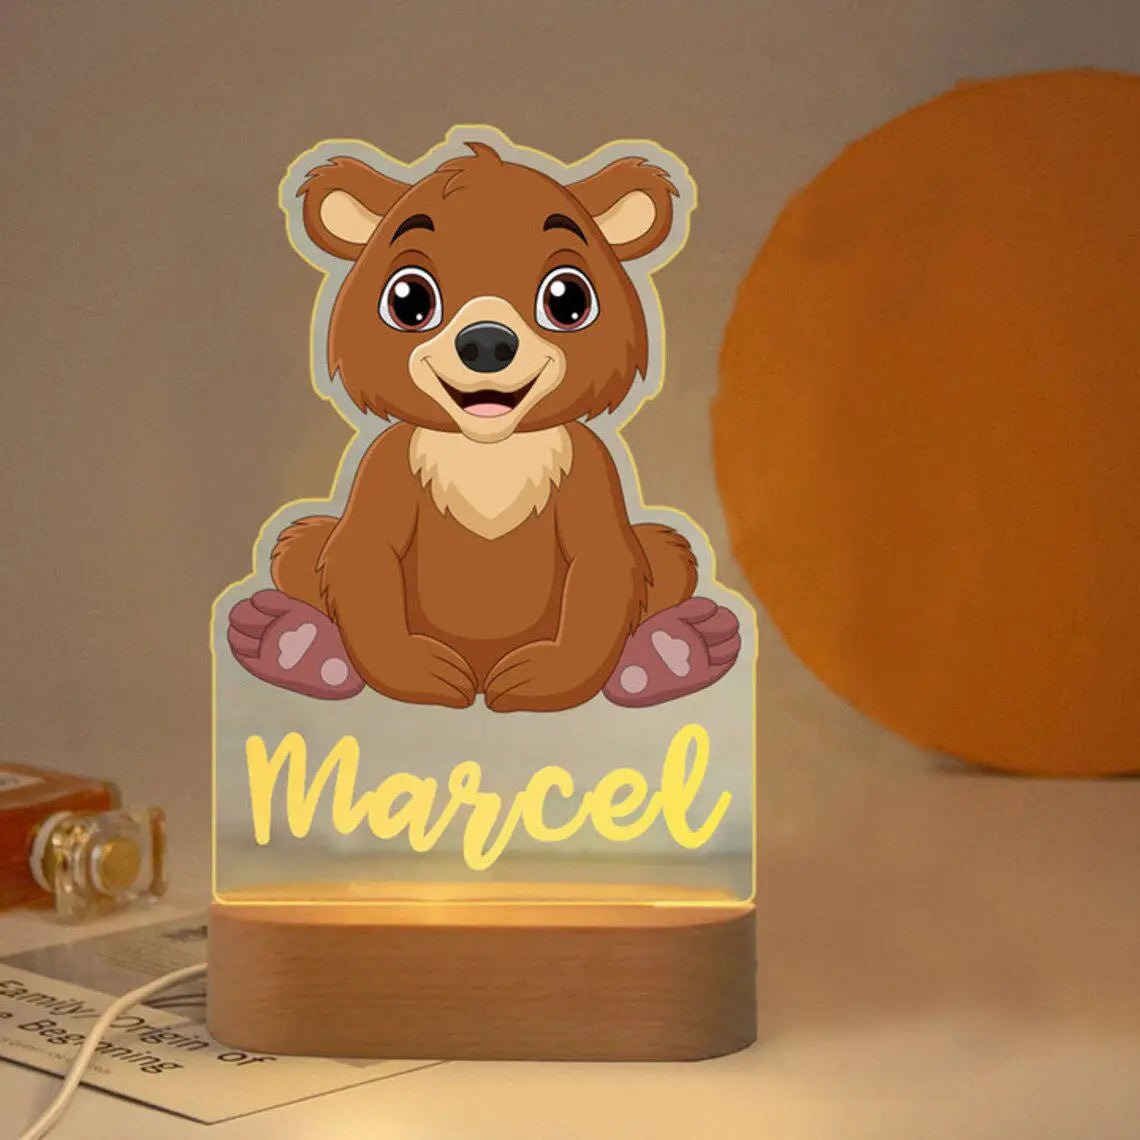 Customized Animal-themed Night Light for Kids - Personalized with Child's Name, Acrylic Lamp for Bedroom Decor Warm Light / 25Brown bear